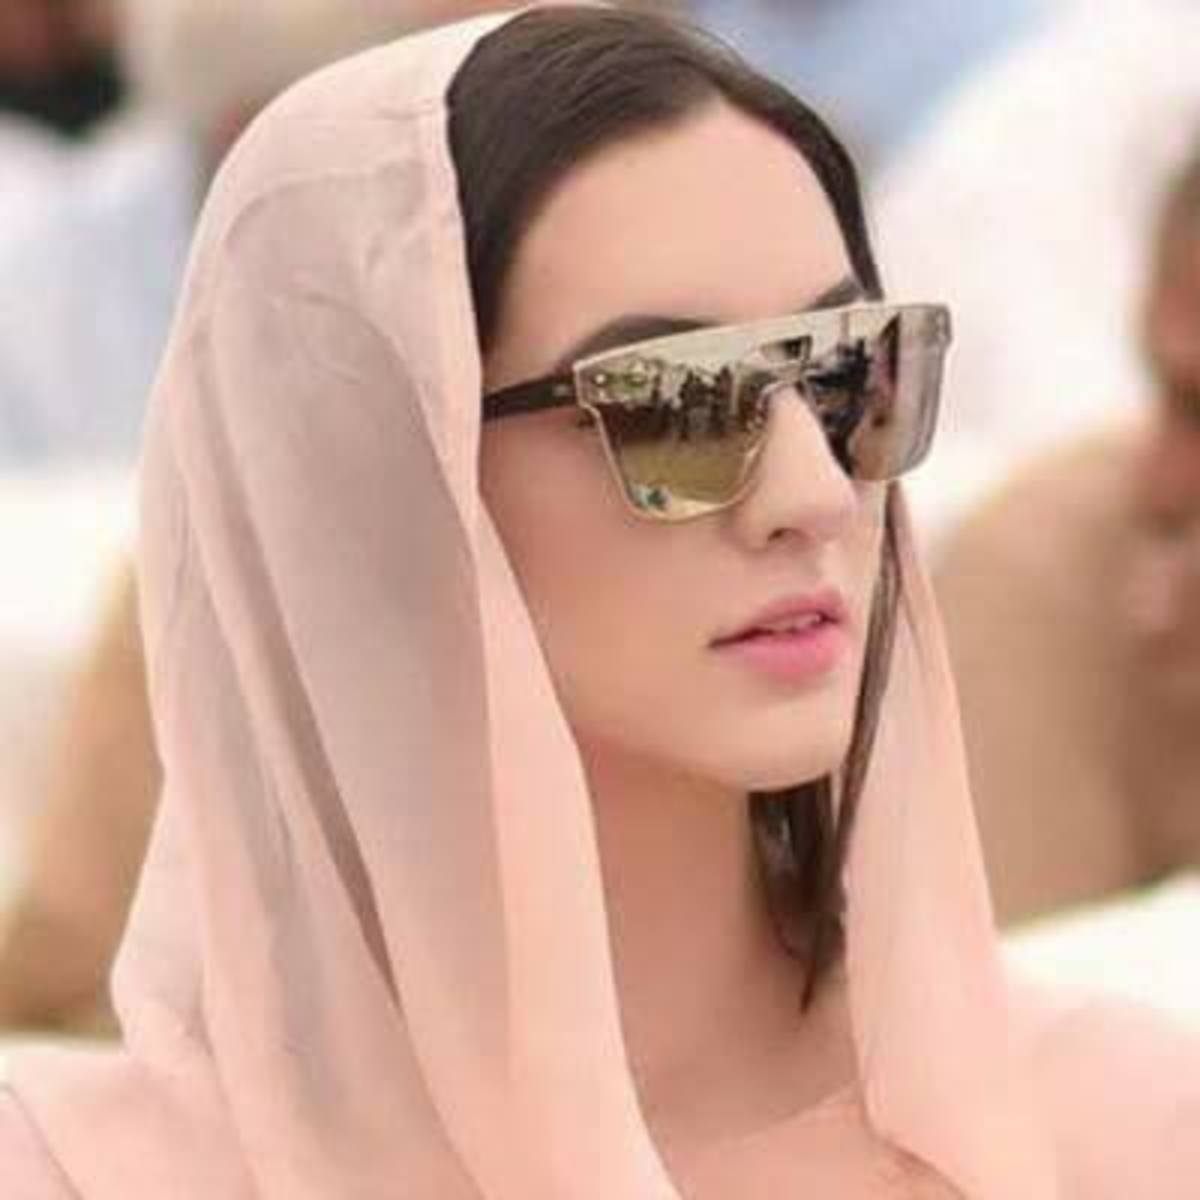 pakistans-top-11-most-stylish-and-fashionable-women-politicians